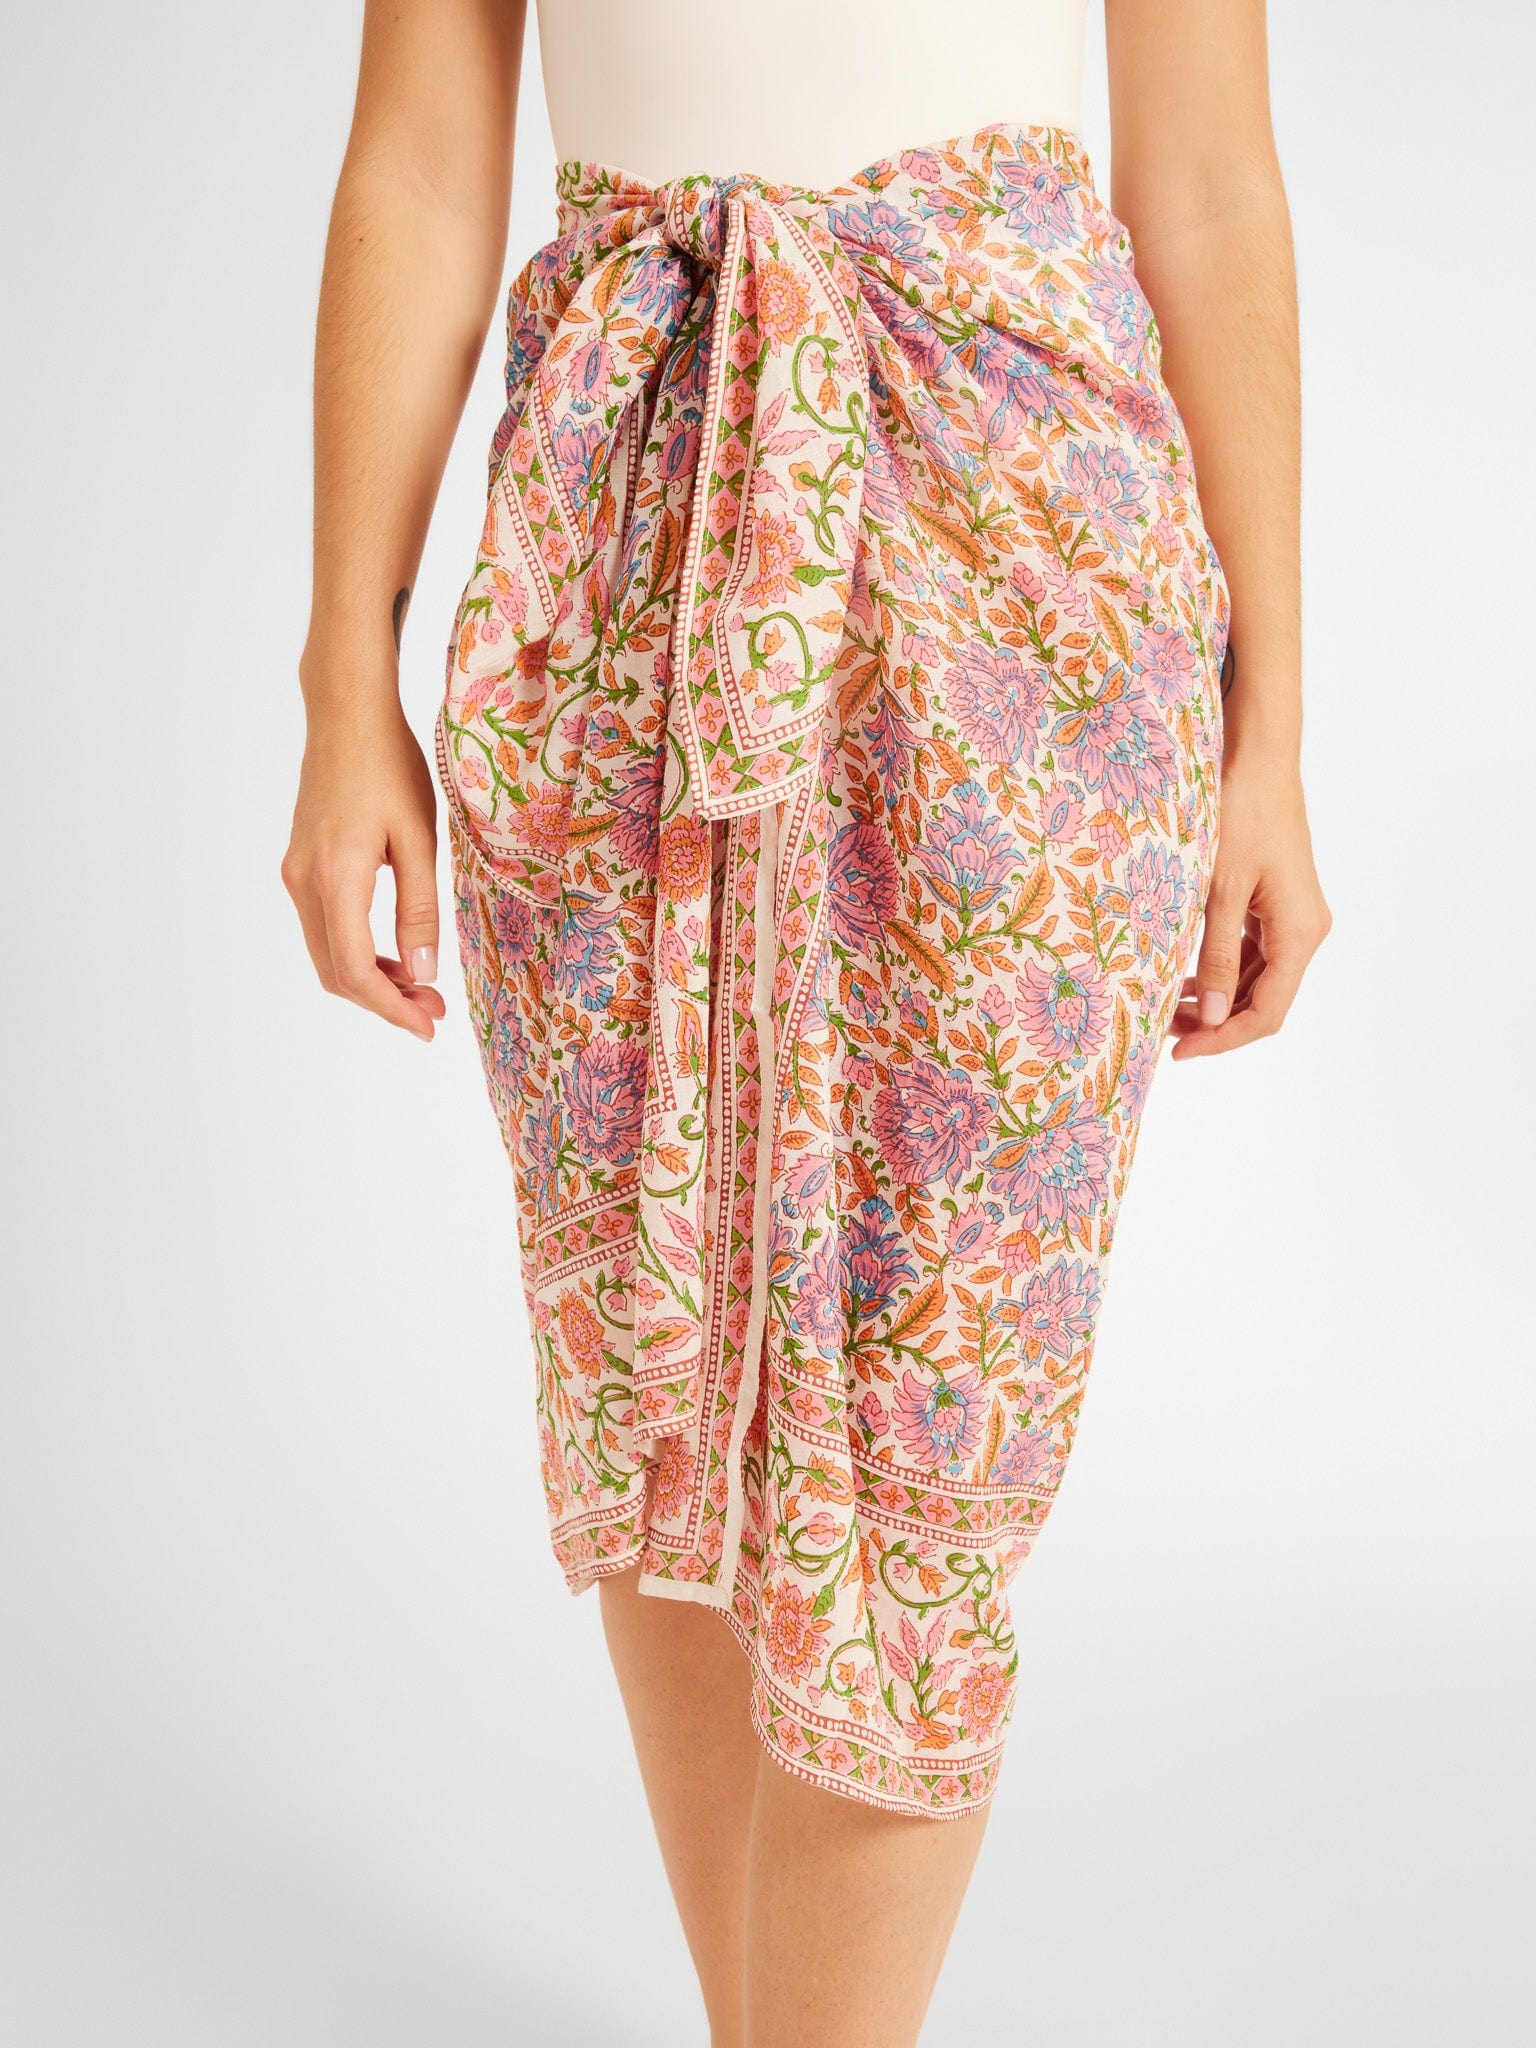 MILLE Clothing One Size Pareo in Avignon Floral